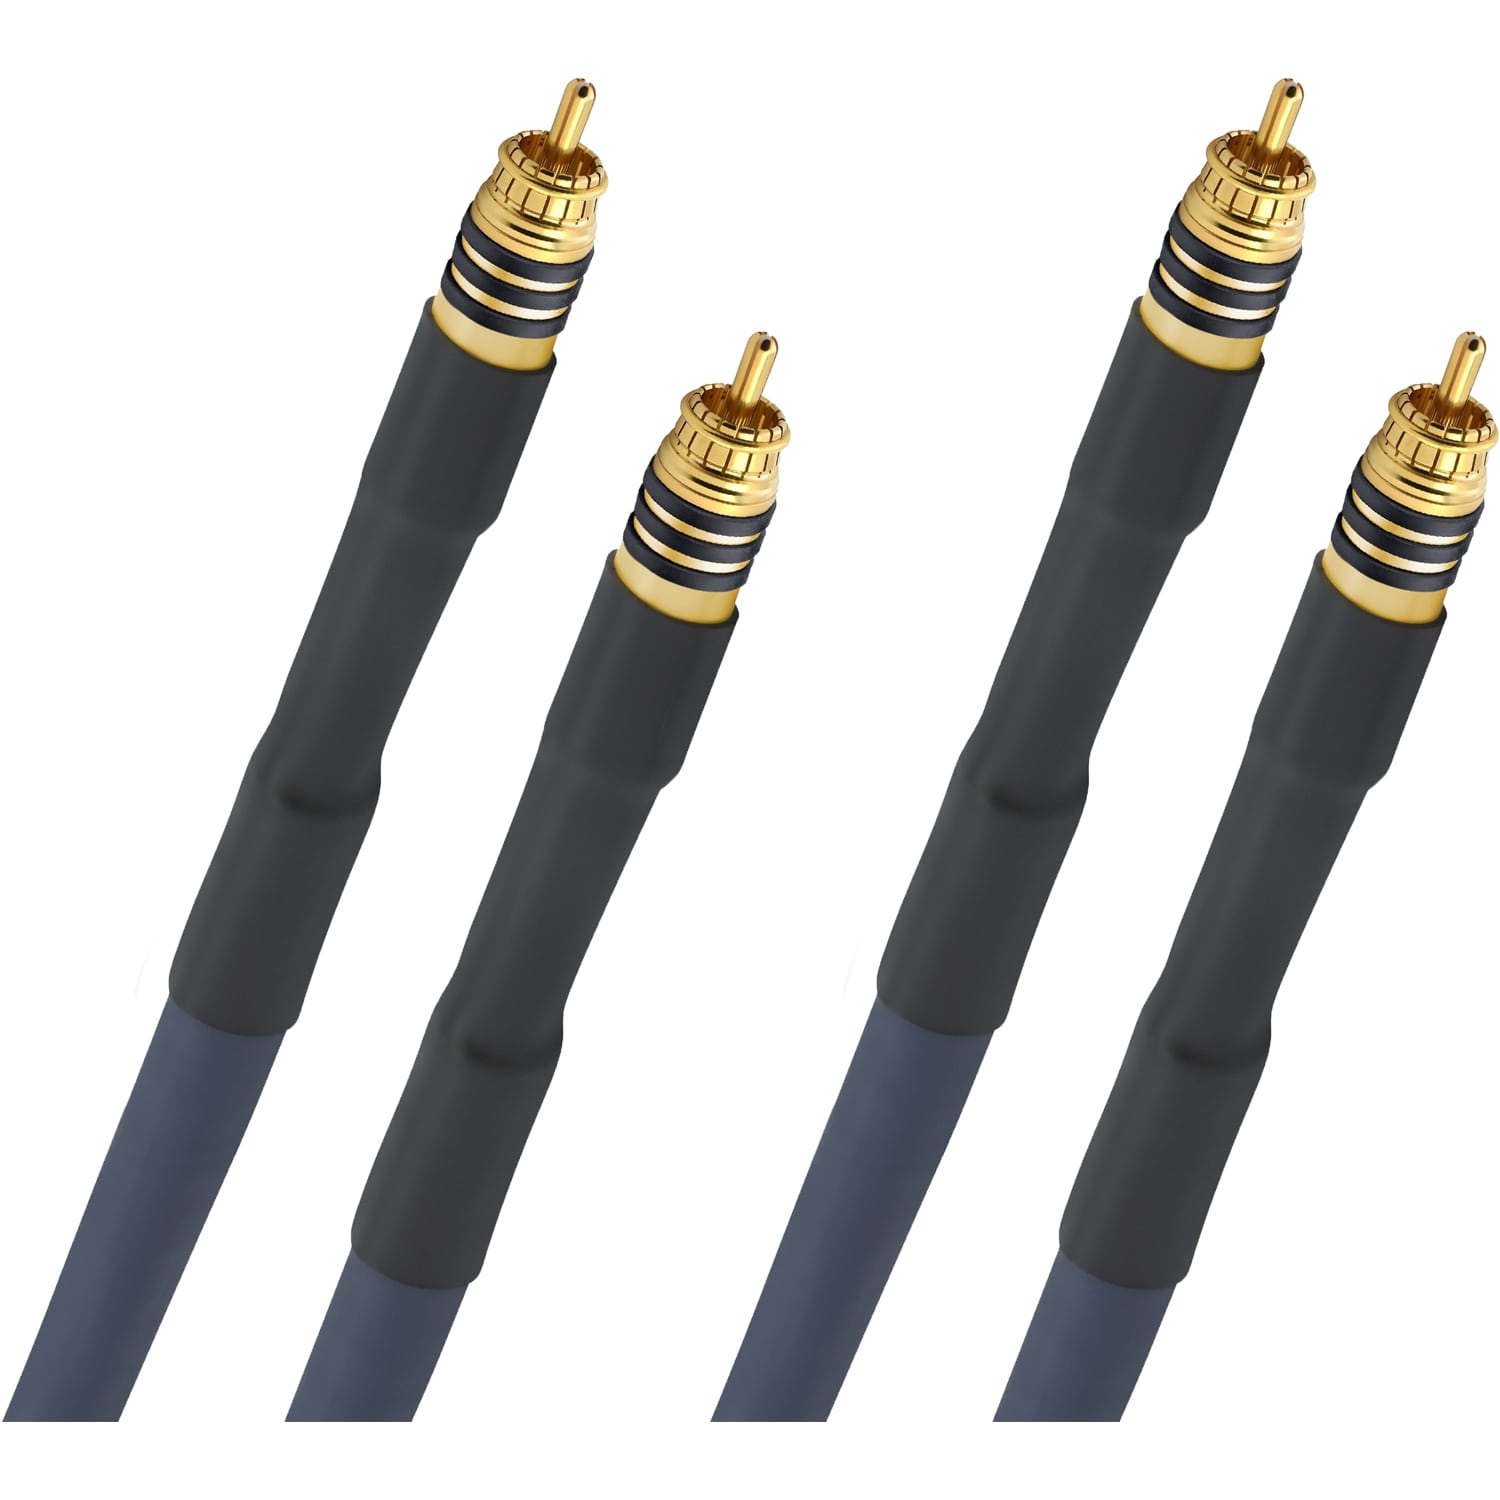 Кабели межблочные аудио Oehlbach STATE OF THE ART XXL Cable RCA, 2x1,50m, gold, D1C13114 силовые кабели oehlbach state of the art xxl powercord 1 5m d1c13061